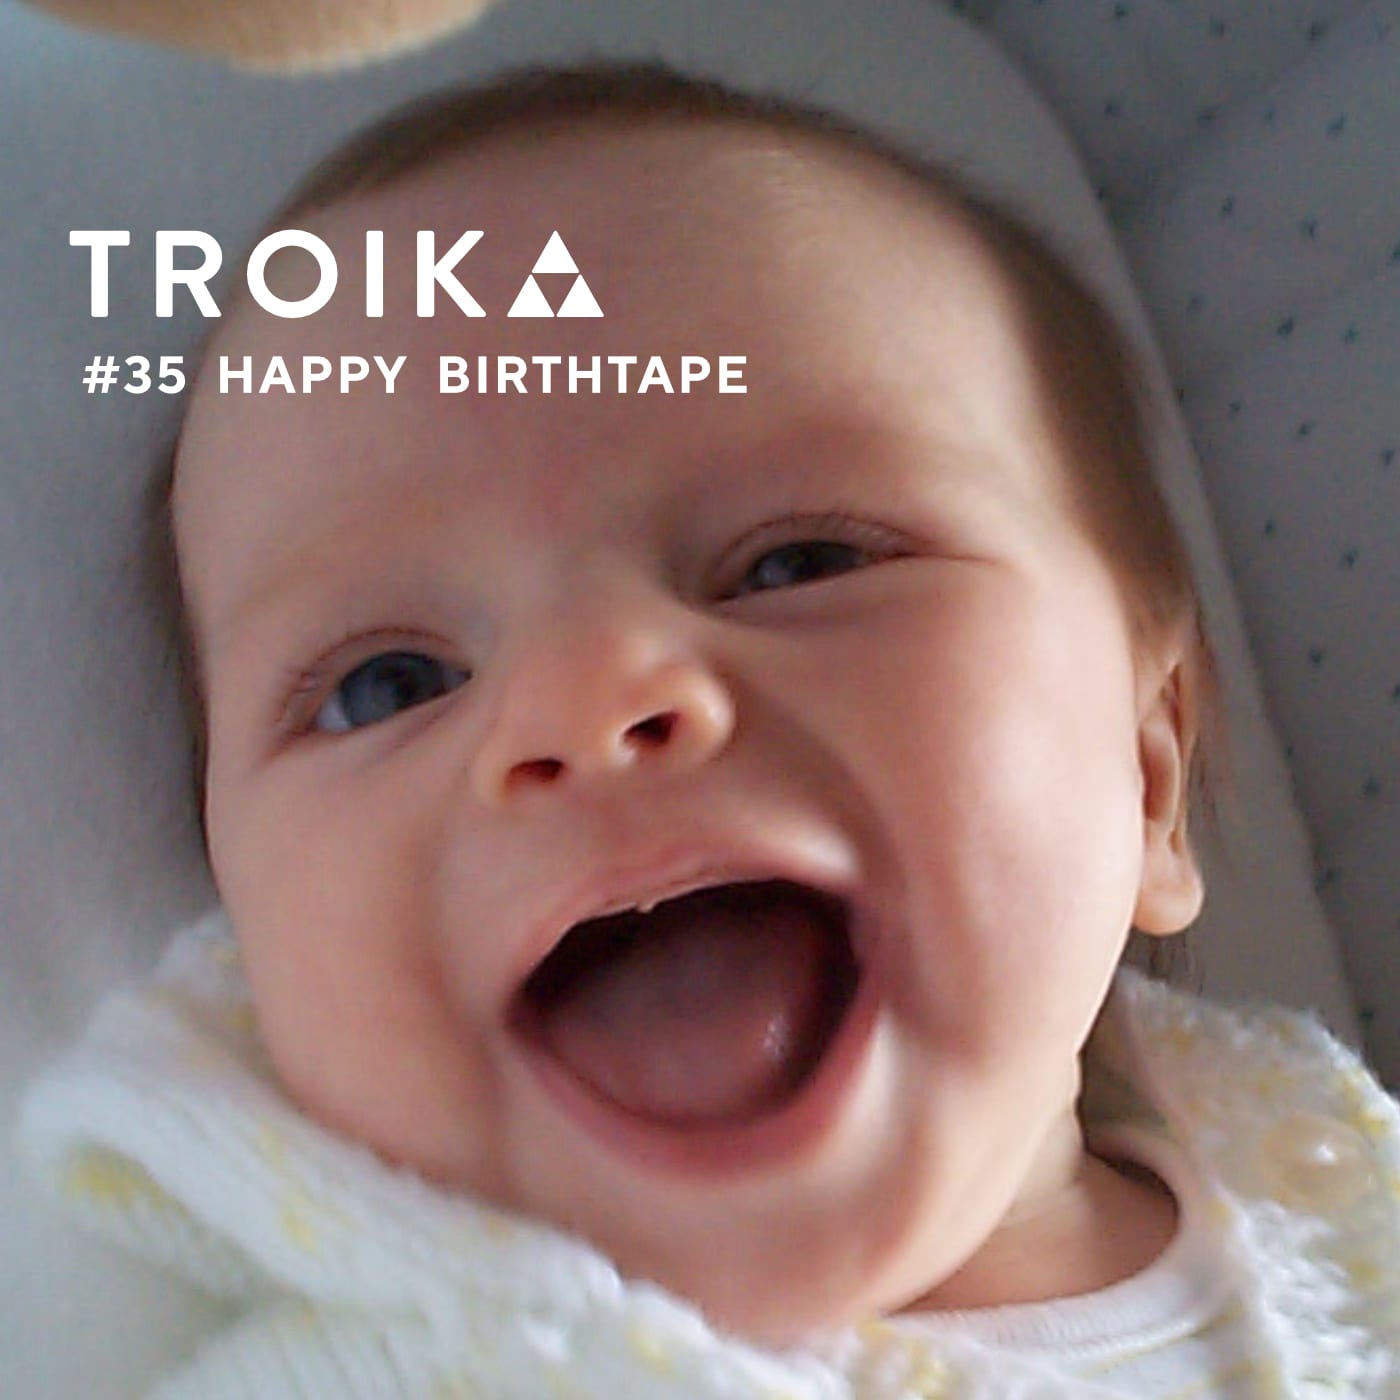 Troika #35: Happy Birthtape! My daughter Samantha at 6 months, showing a cute toothless smile